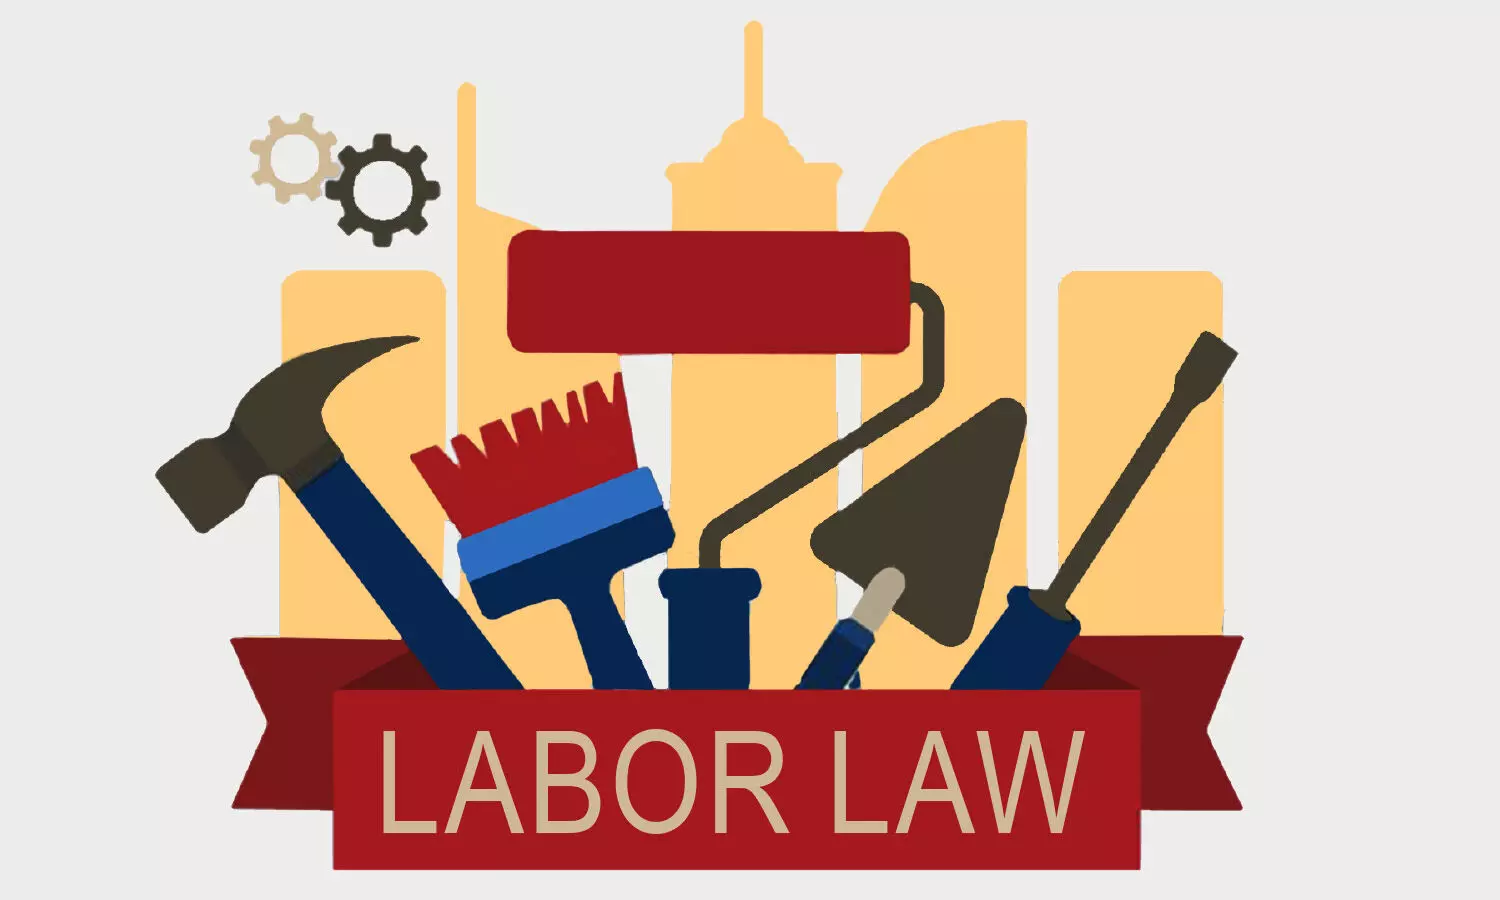 Labor Law Posters for Workplace Compliance